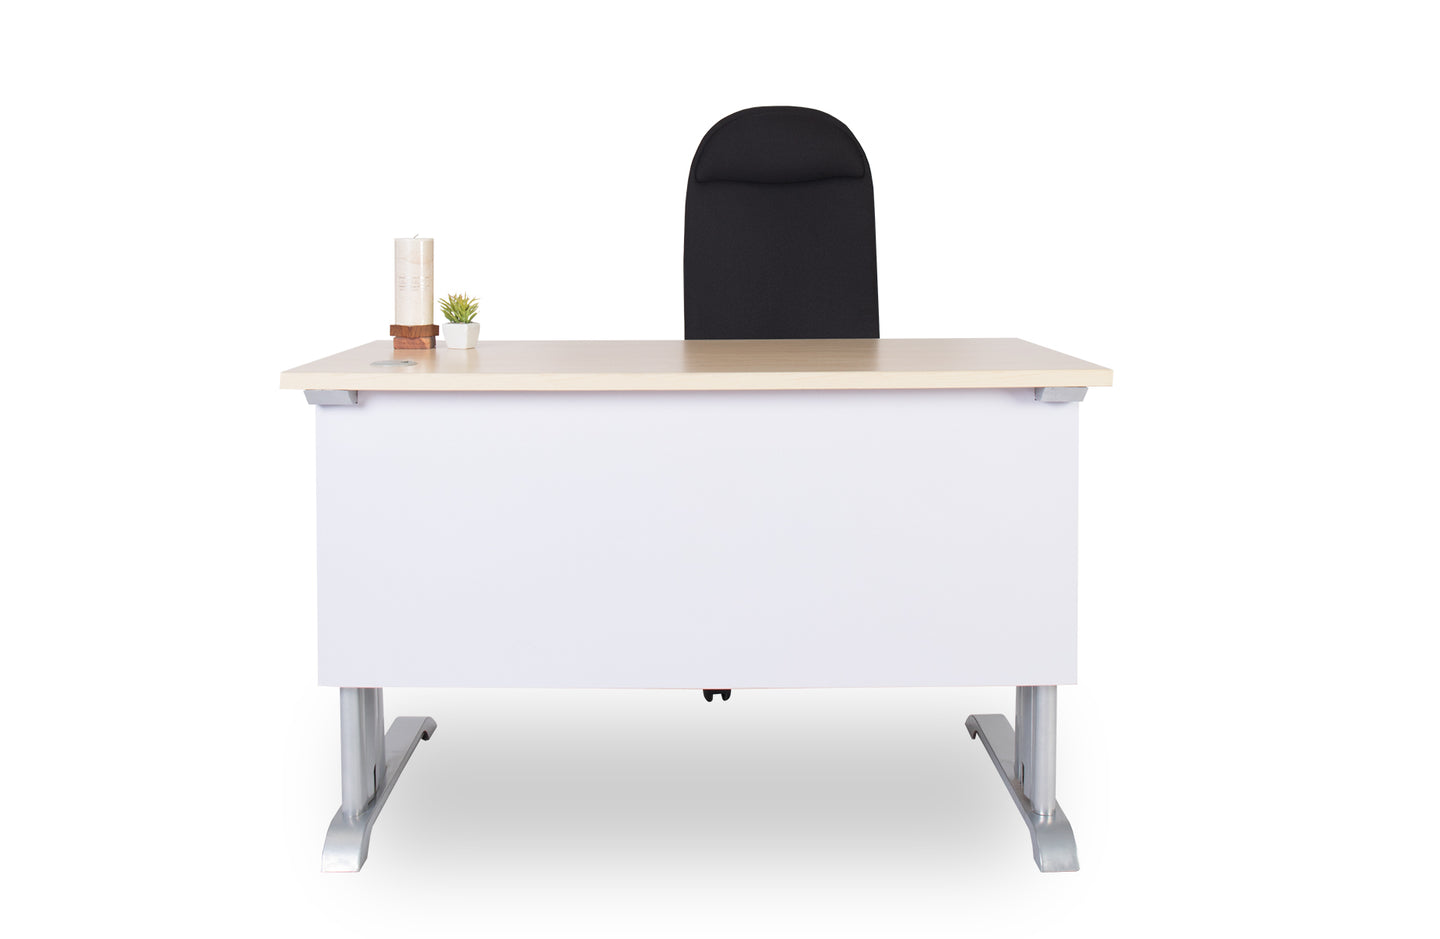 Manager Desk (MO-MD-BS-03)